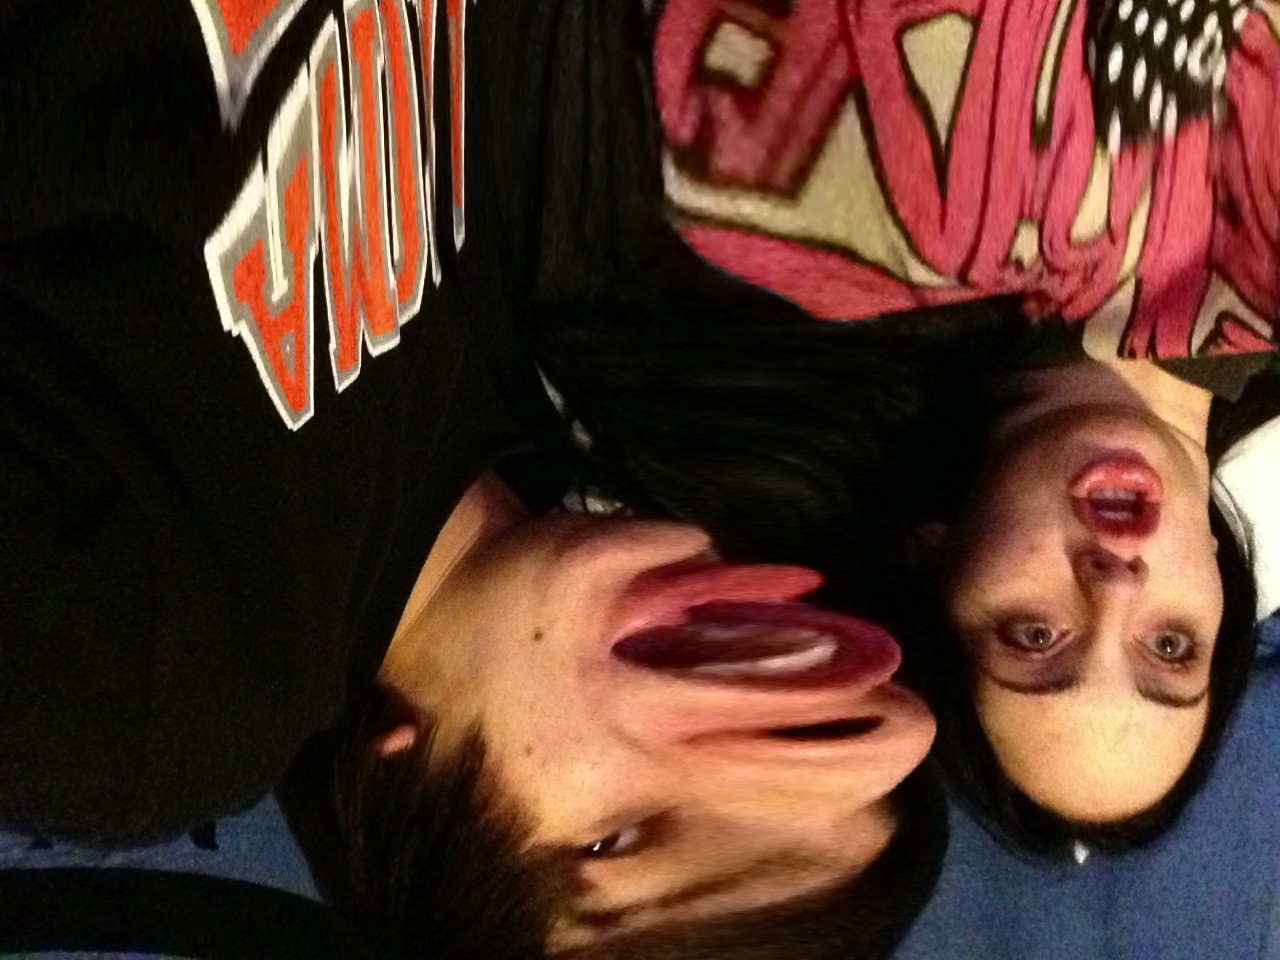 This ones upside down too -.- me and my closest friend Connor who is actually kinda my boyfriend and have kinda been together for 2 years